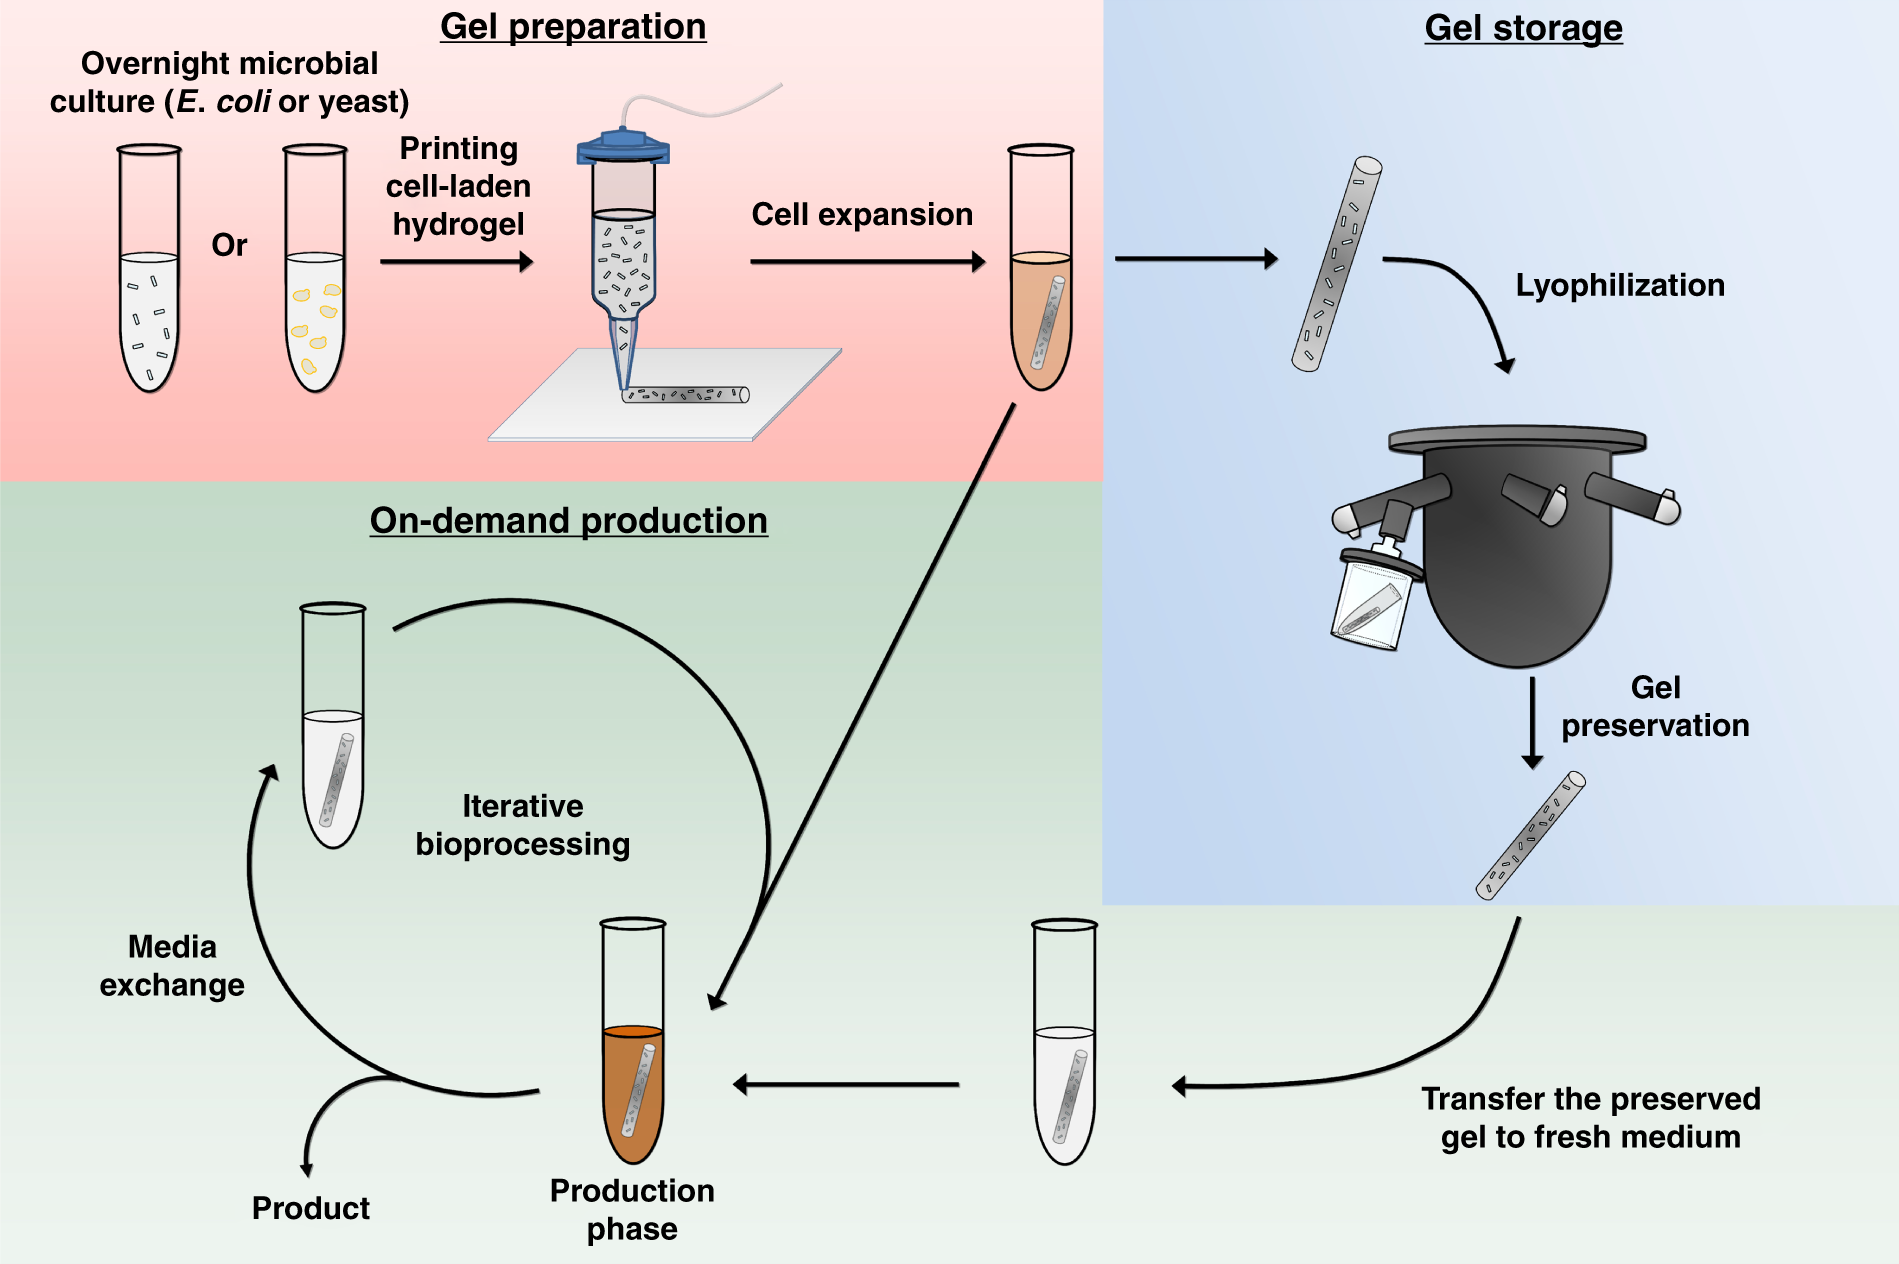 Compartmentalized microbes and co-cultures in hydrogels for on-demand  bioproduction and preservation